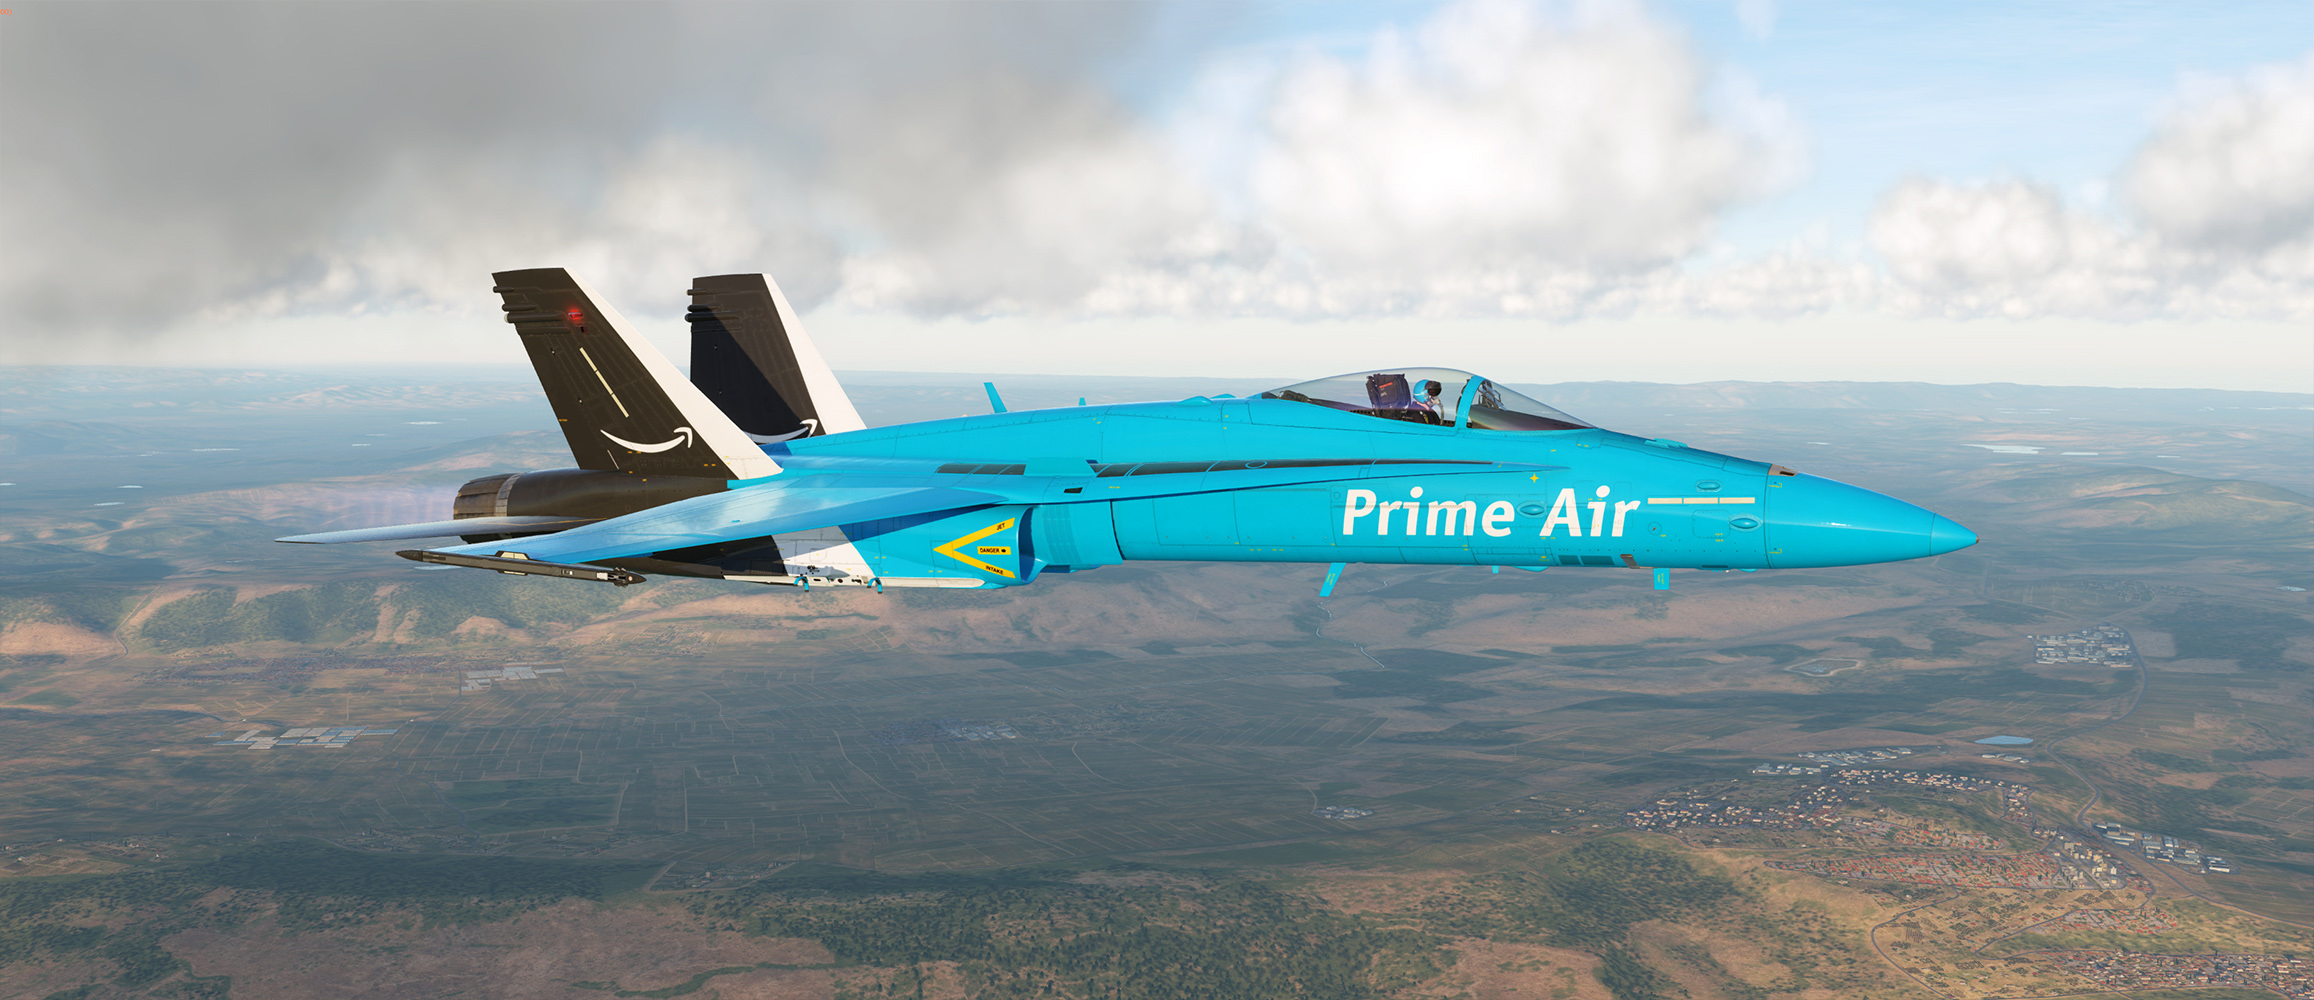 F-18 Racing Livery: Prime Air